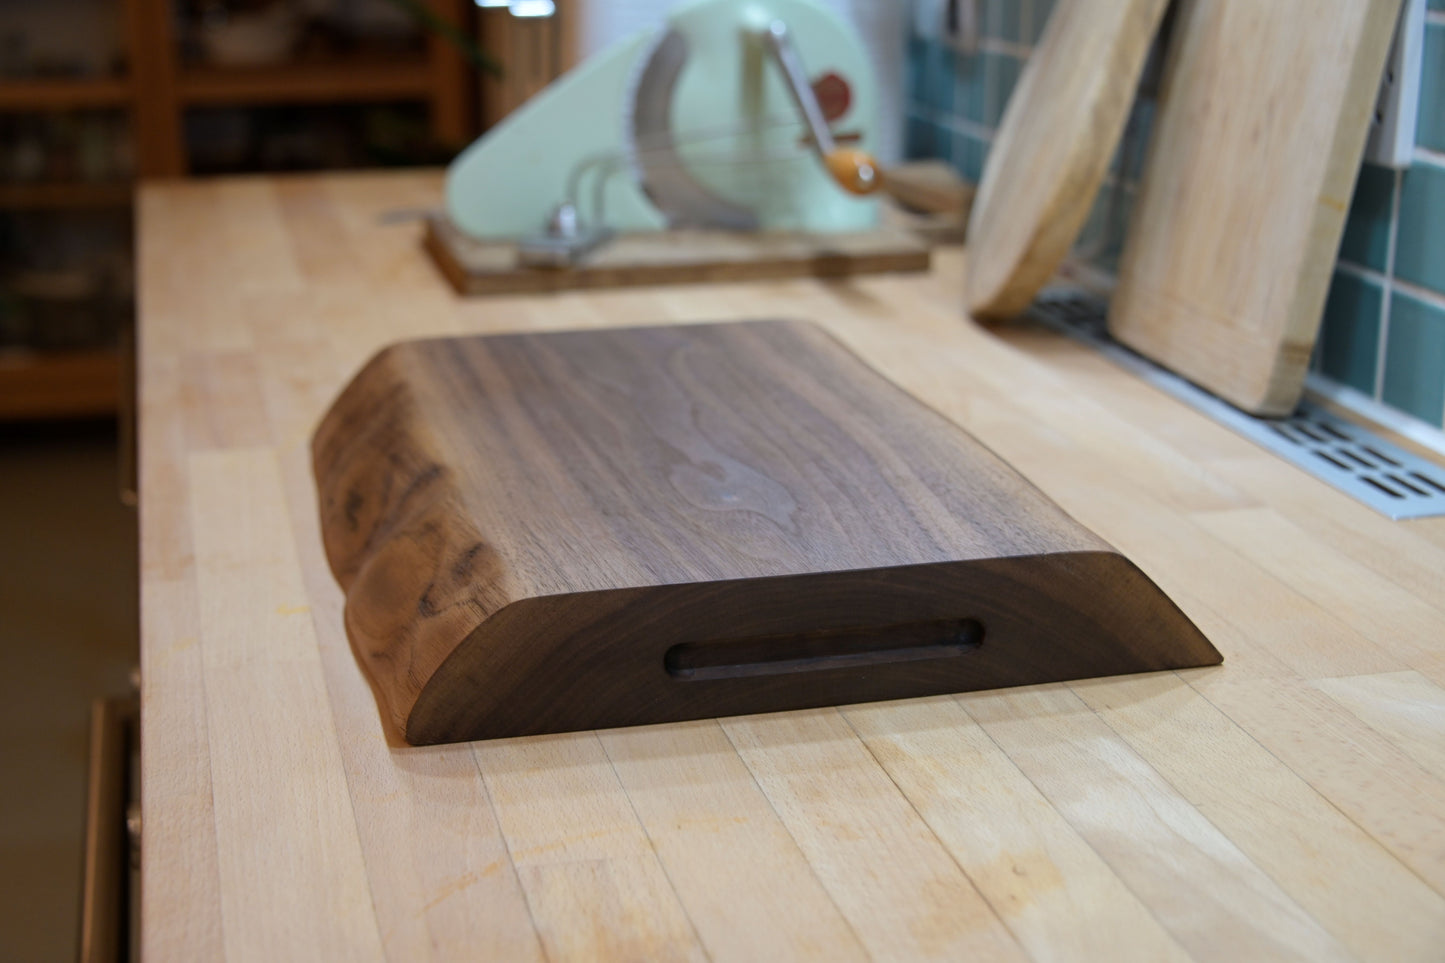 Large Walnut Chopping Board With Handles